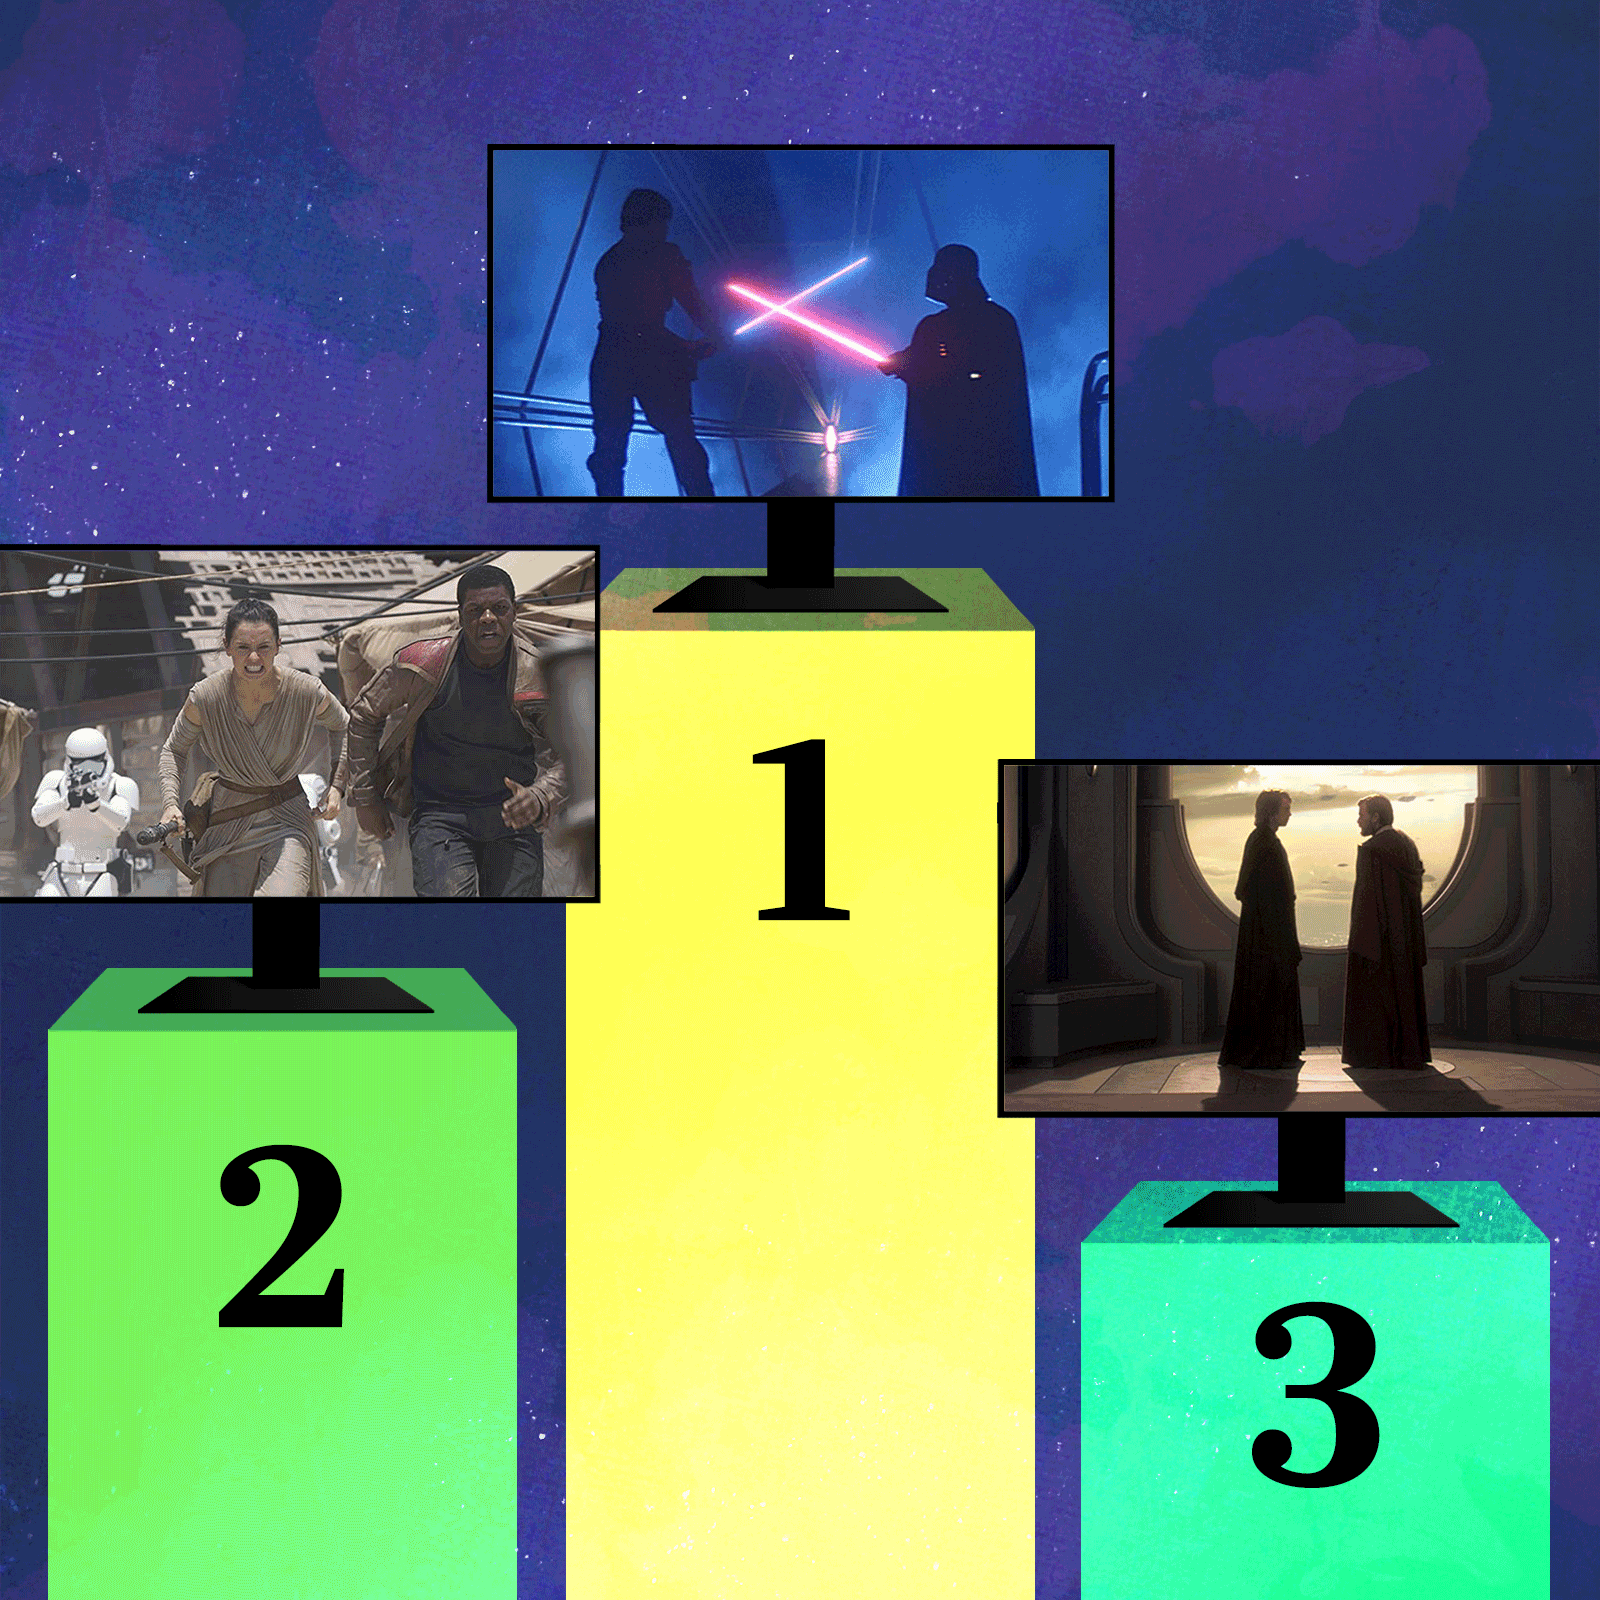 Three pedestals with screen images of star wars movies on each one